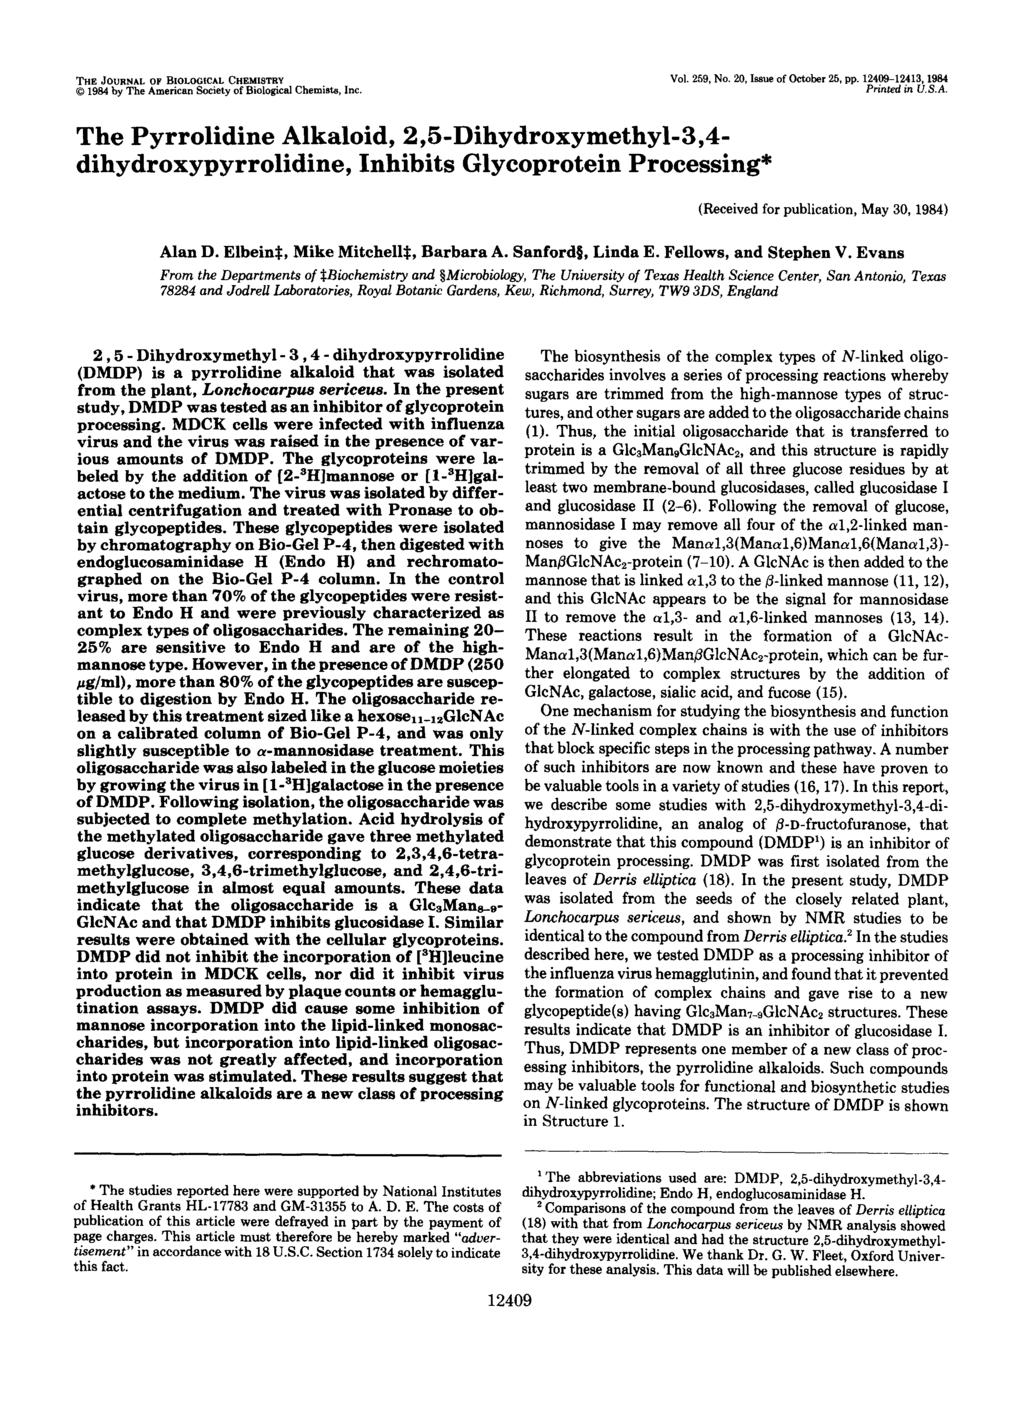 THE JOURNAL OF BIOLOGICAL CHEMISTRY 0 1984 by The American Society of Biological Chemists, Inc. Vol. 259, No. Issue of October 25, pp. 12409-12413 1984 Printed in I~.s.A. The Pyrrolidine Alkaloid, 2,5-Dihydroxymethyl-3,4- dihydroxypyrrolidine, Inhibits Glycoprotein Processing* (Received for publication, May 30, 1984) Alan D.